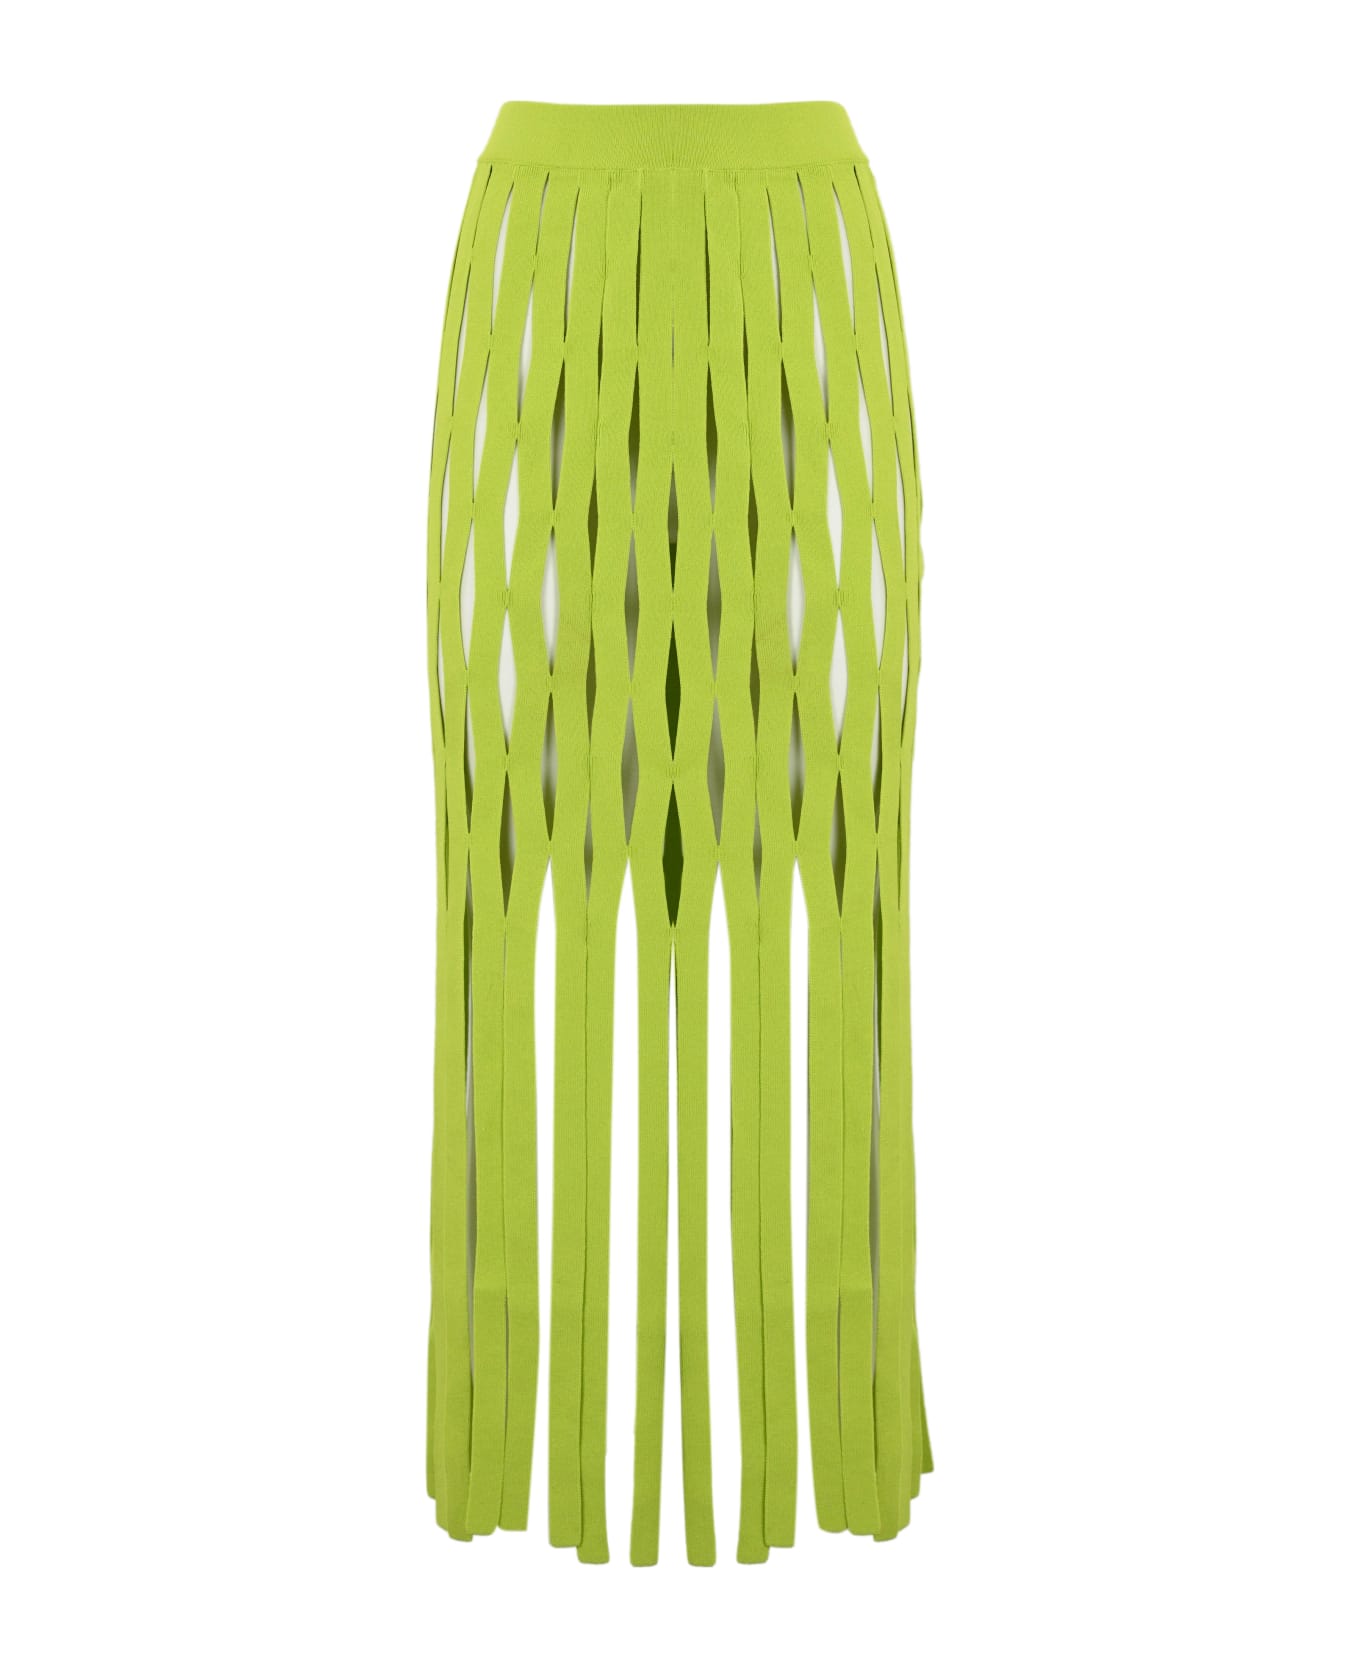 Liviana Conti Viscose Skirt With Ribbons - Cyber lime